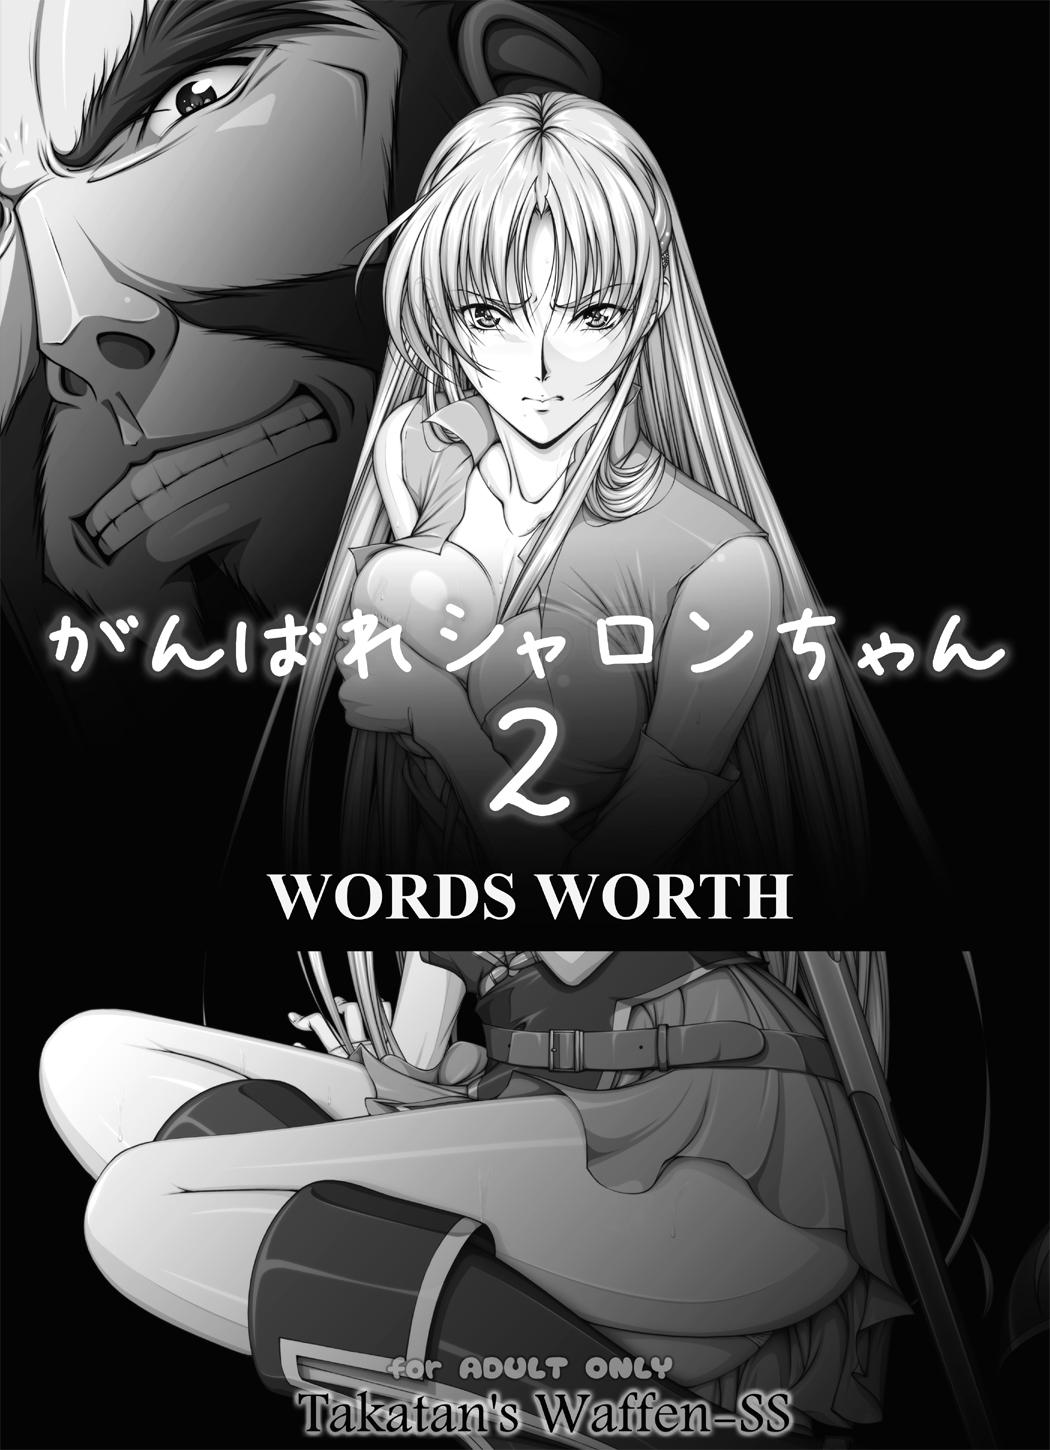 Girls Getting Fucked [Takatan's Waffen-SS] Fight, Sharon! 2 [Deluxe Edition] (Words Worth) +omake - Words worth Lover - Page 8